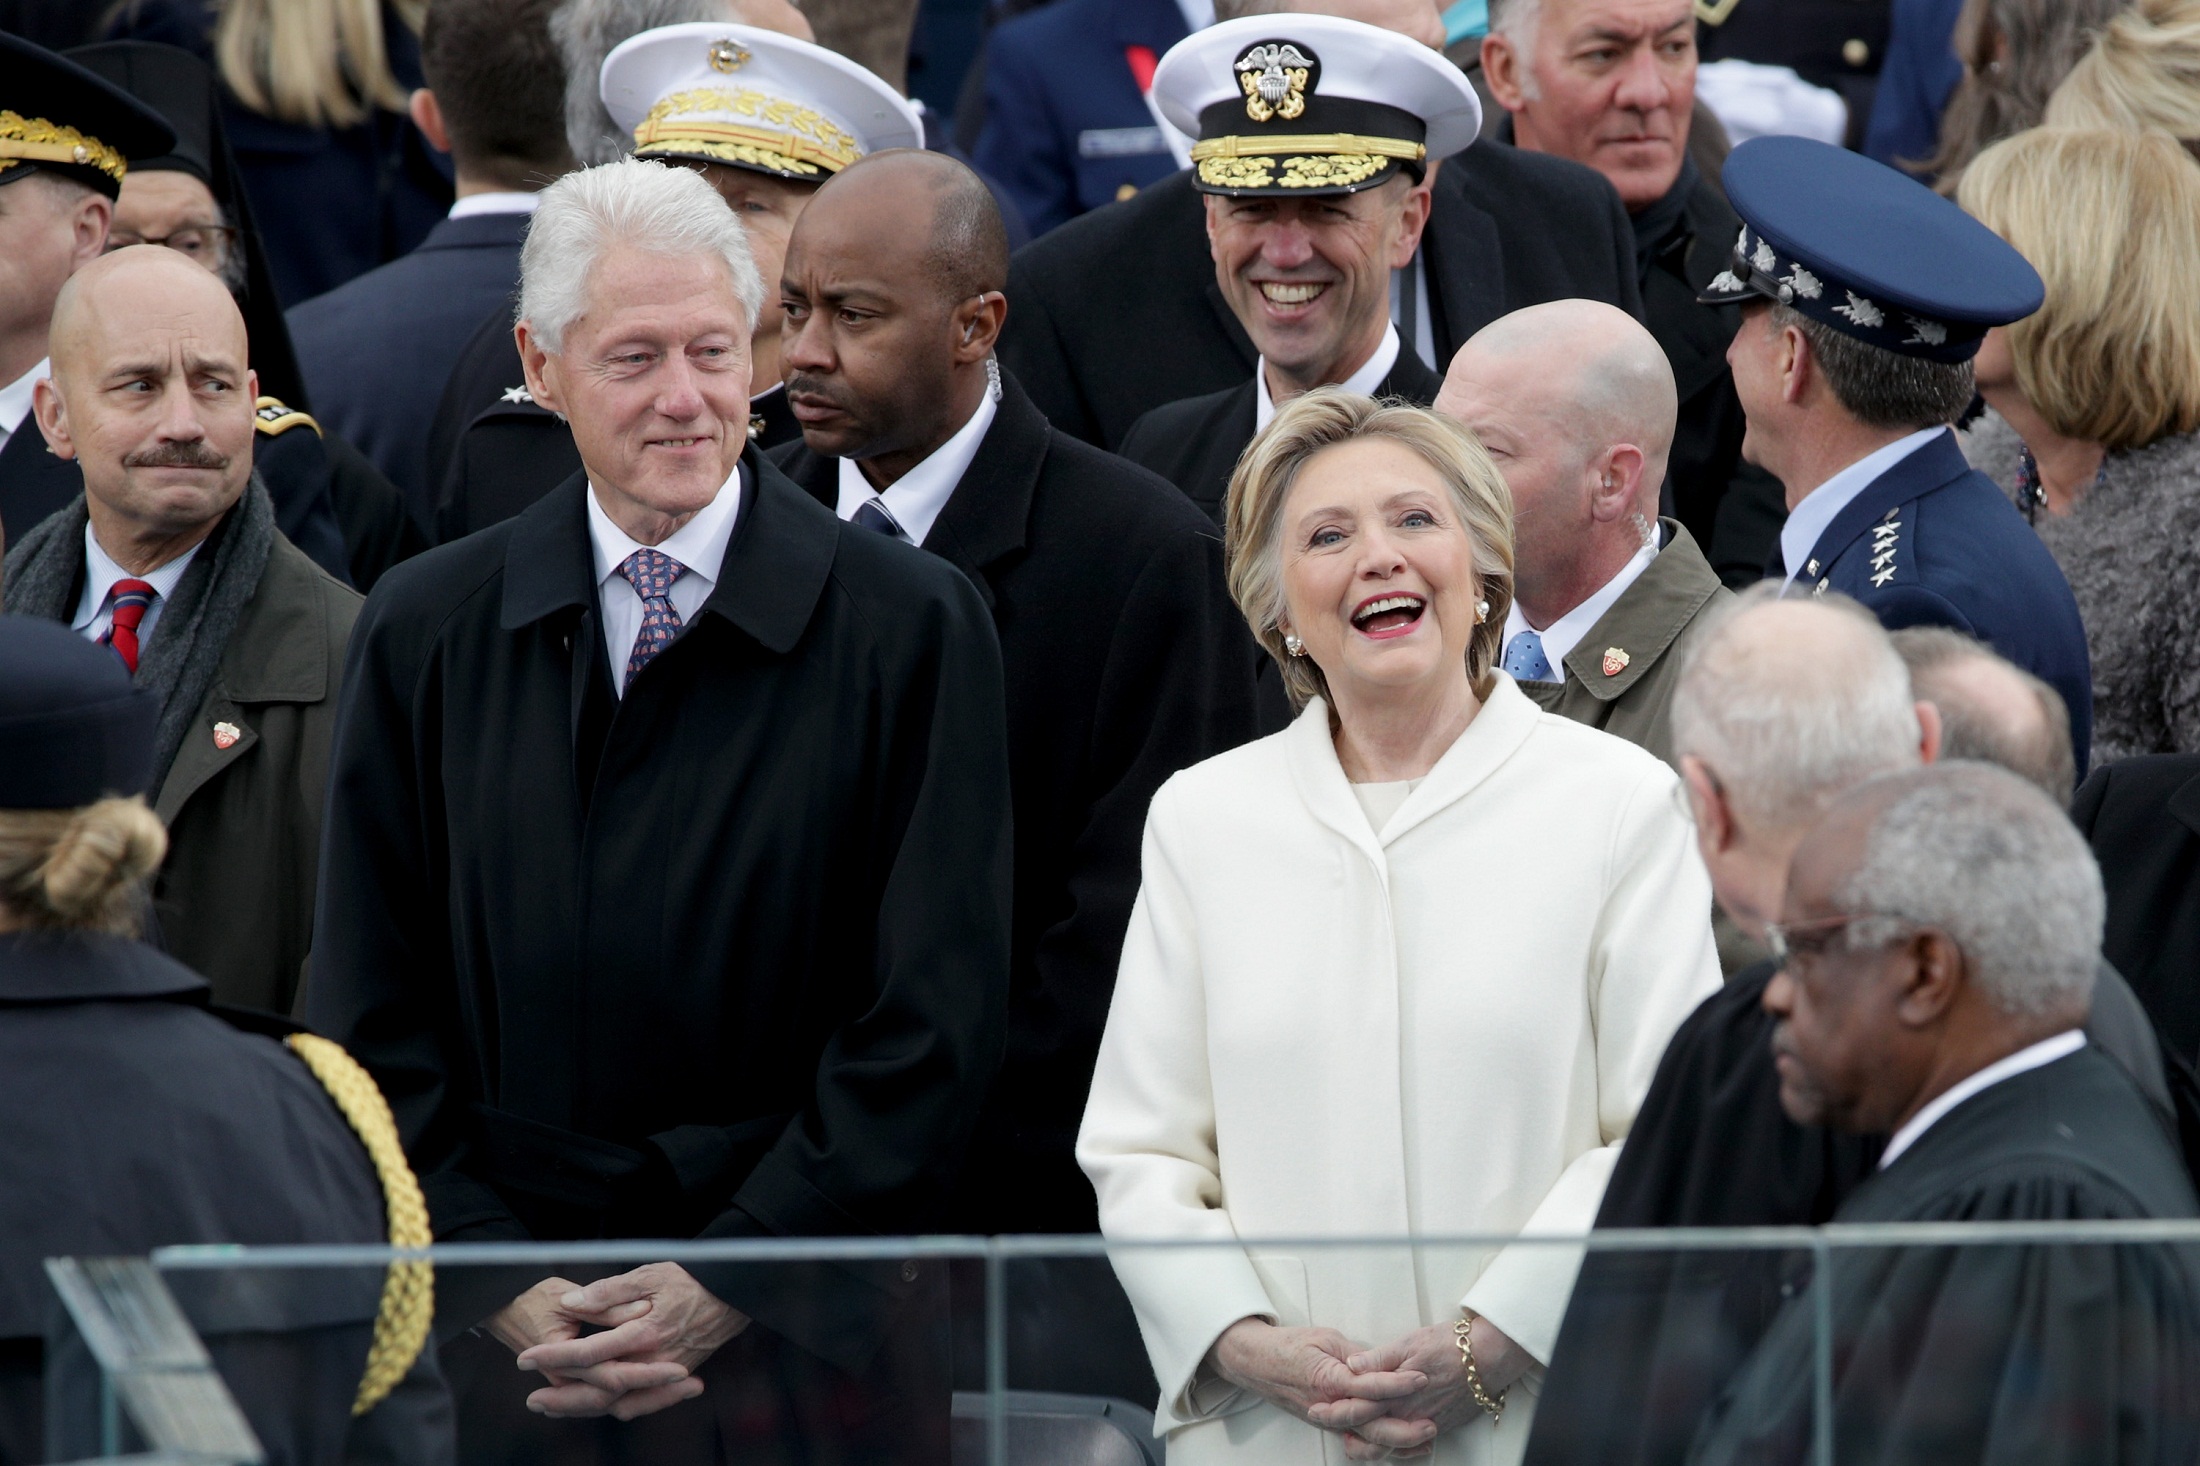 WASHINGTON, DC - JANUARY 20: Former President Bill Clinton and former Democratic presidential nominee Hillary Clinton arrive on the West Front of the U.S. Capitol on January 20, 2017 in Washington, DC. In today's inauguration ceremony Donald J. Trump becomes the 45th president of the United States.   Alex Wong/Getty Images/AFP